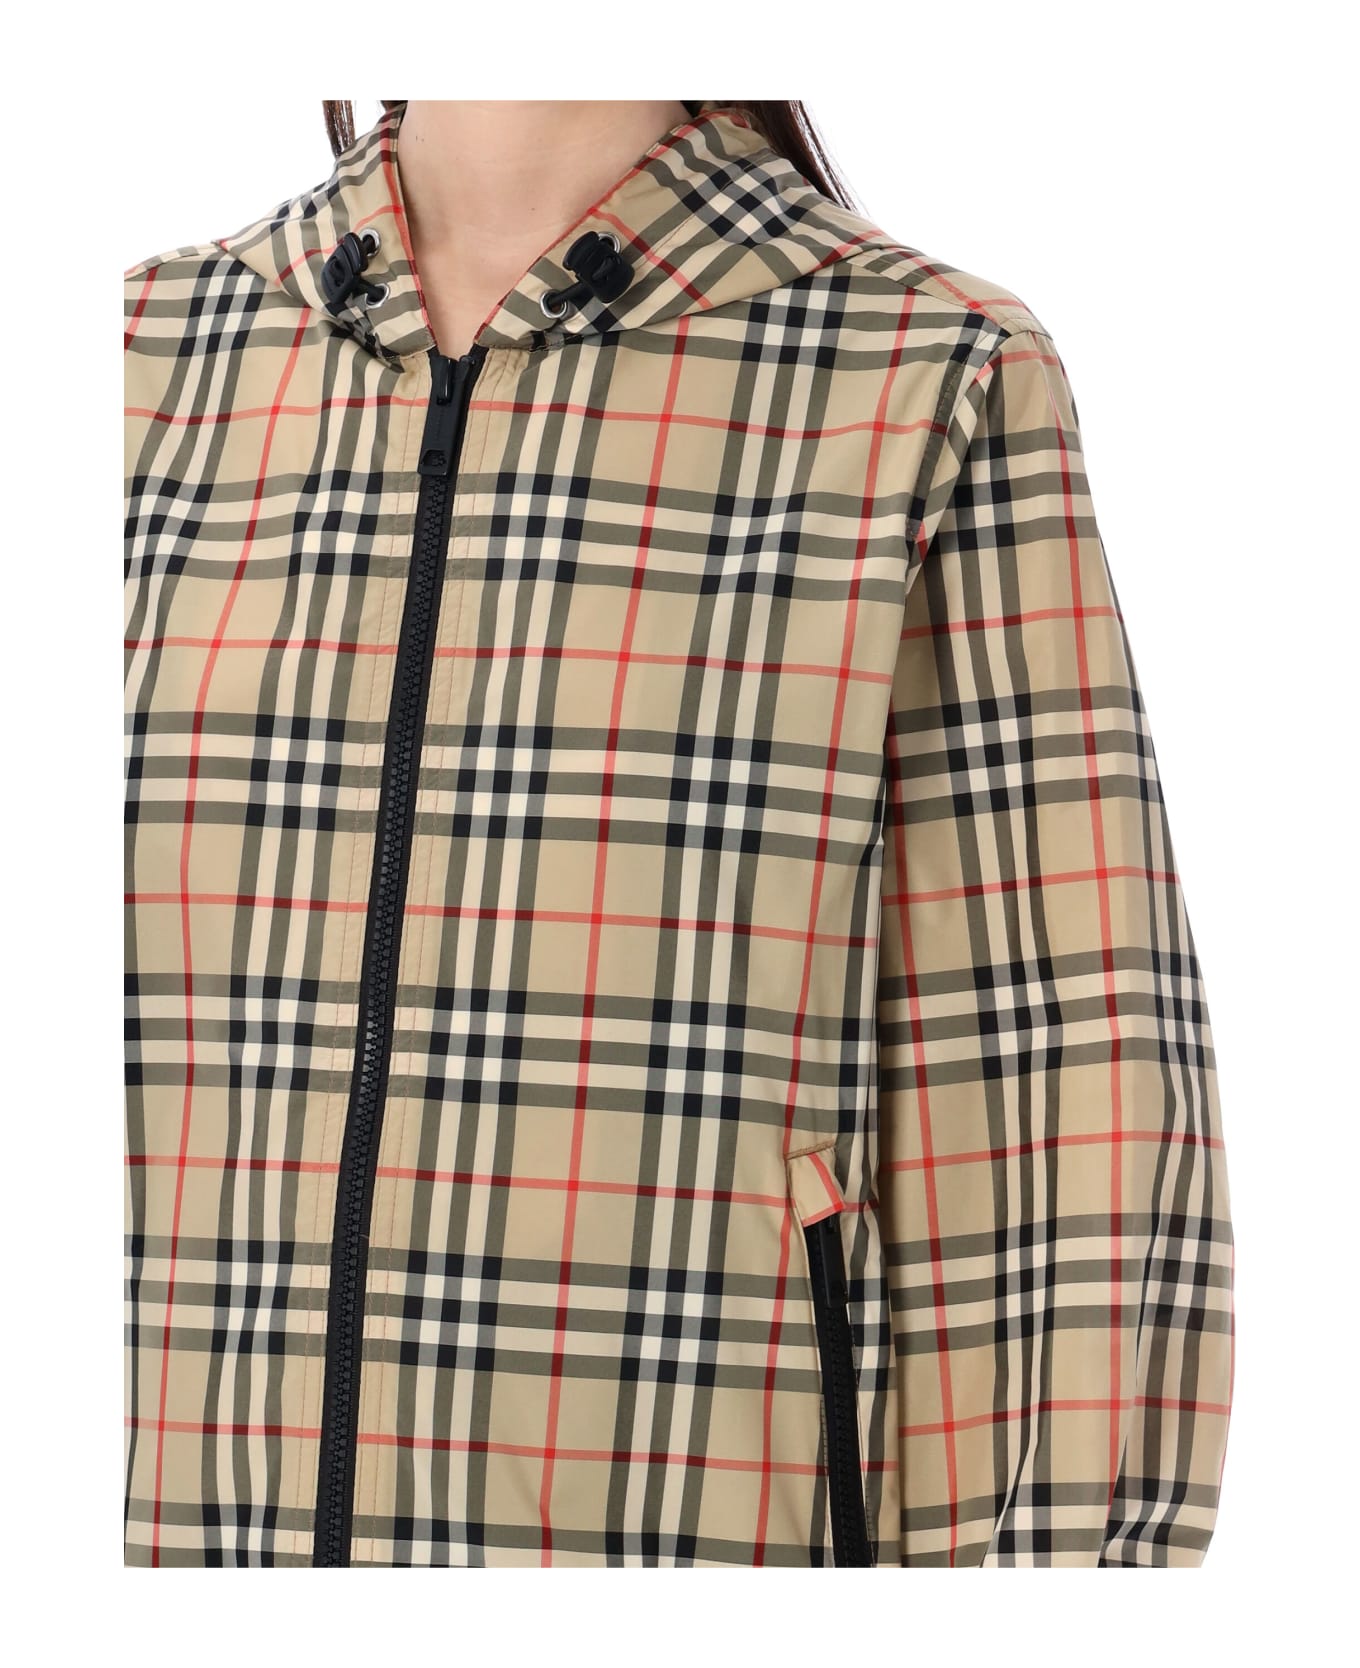 Burberry London Everton Vintage Check Jacket - ARCHIVE BEIGE IP CHK ブレザー